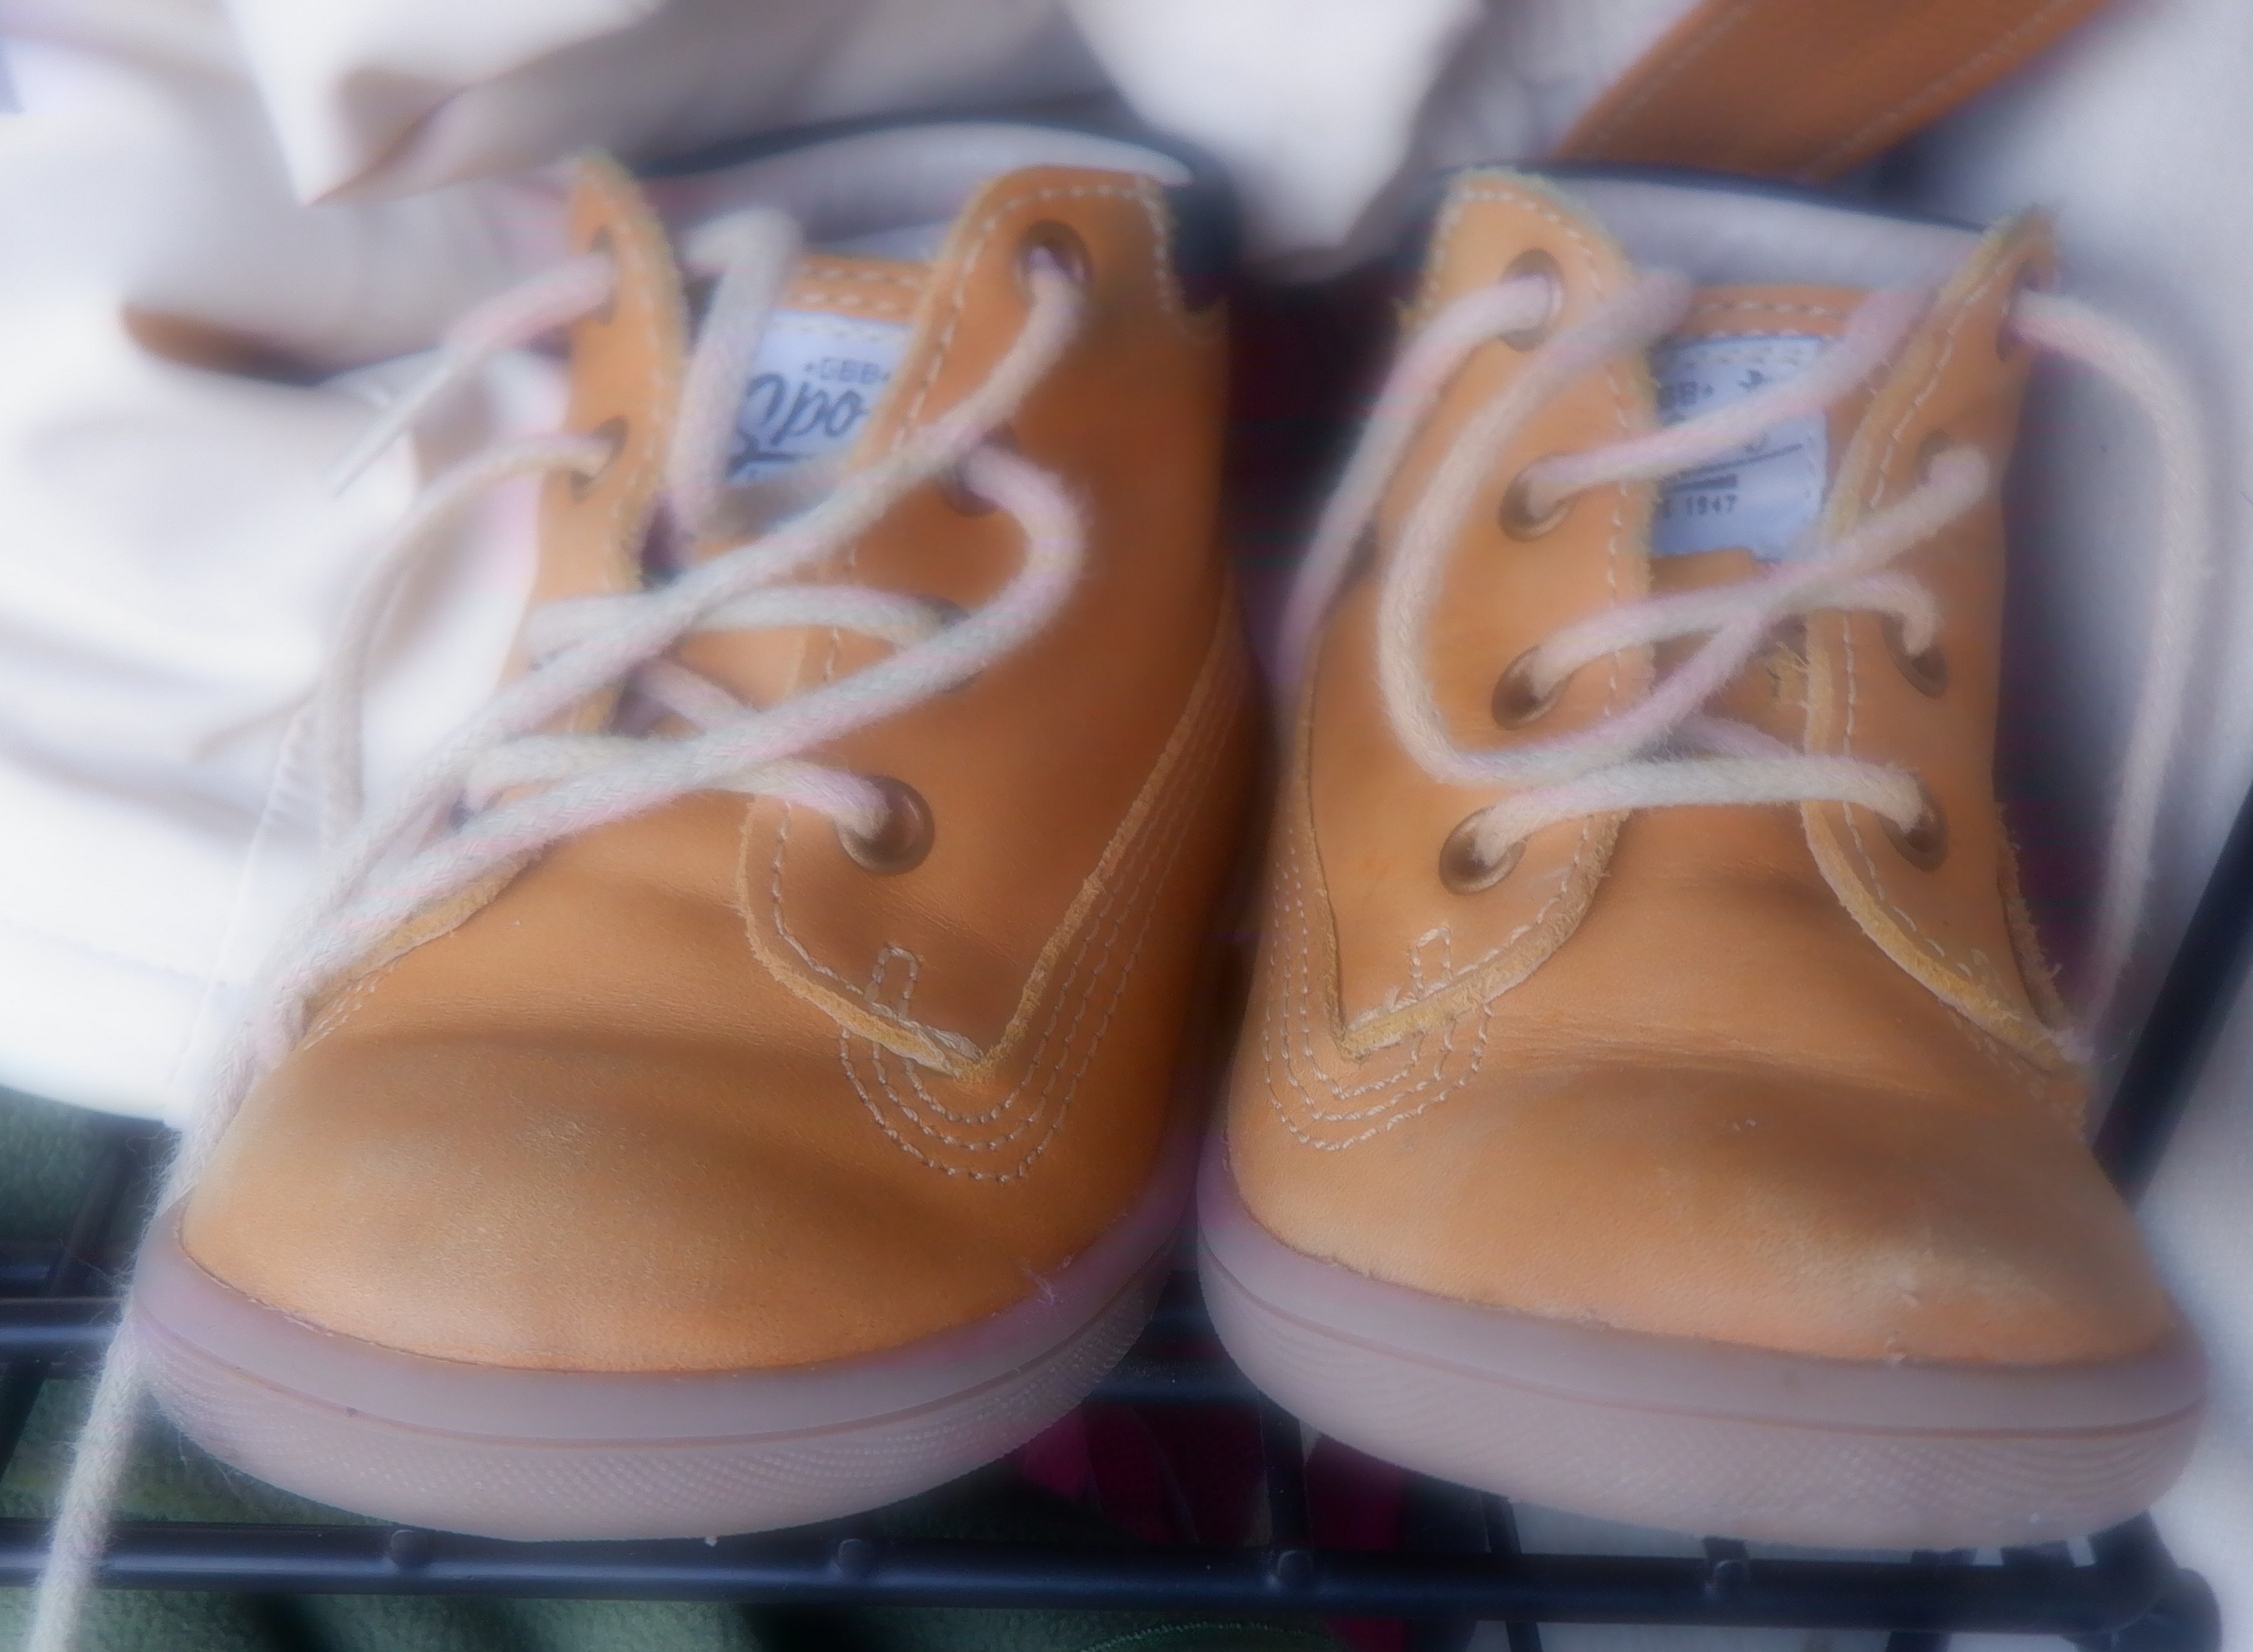 Photo taken by me of kid's shoes 1-19-23